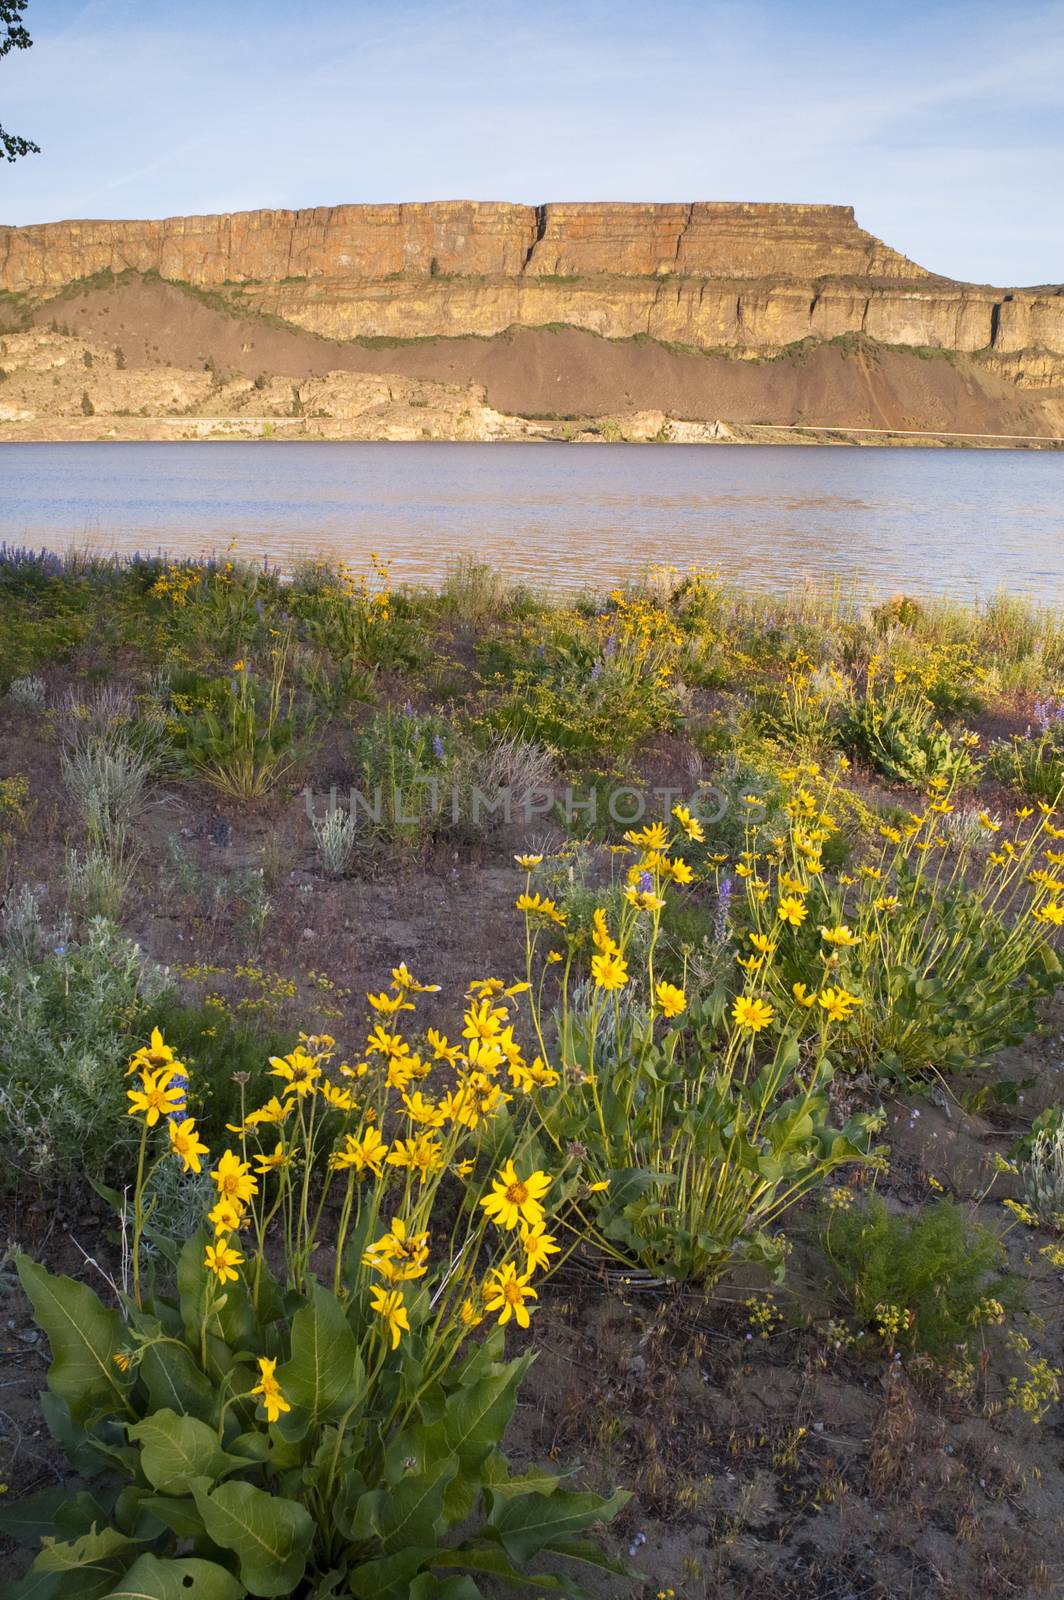 Flowers somehow grow out of the dry ground in Eastern Washington